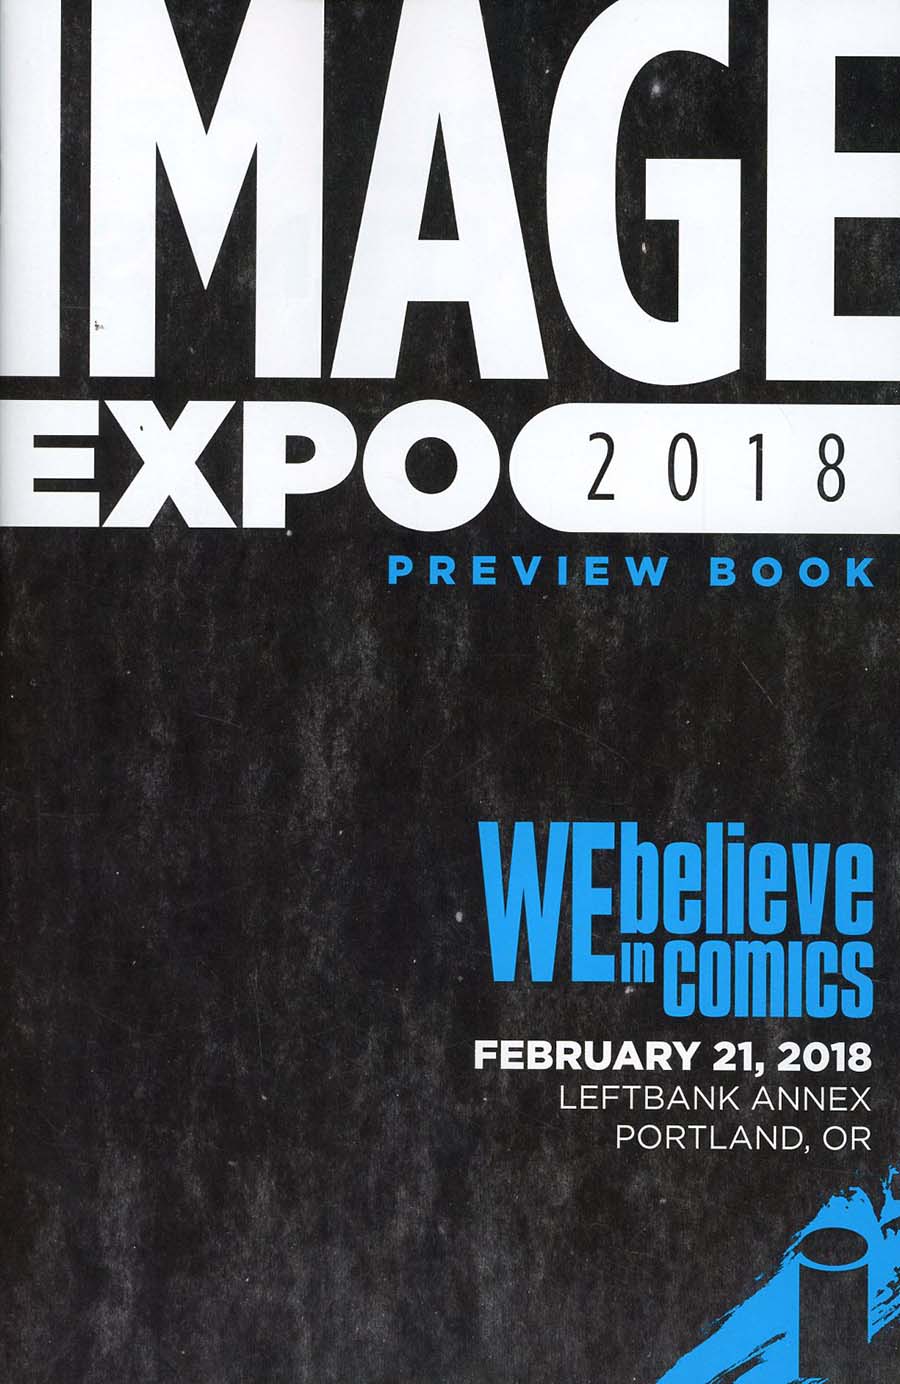 Image Expo 2018 Preview Book